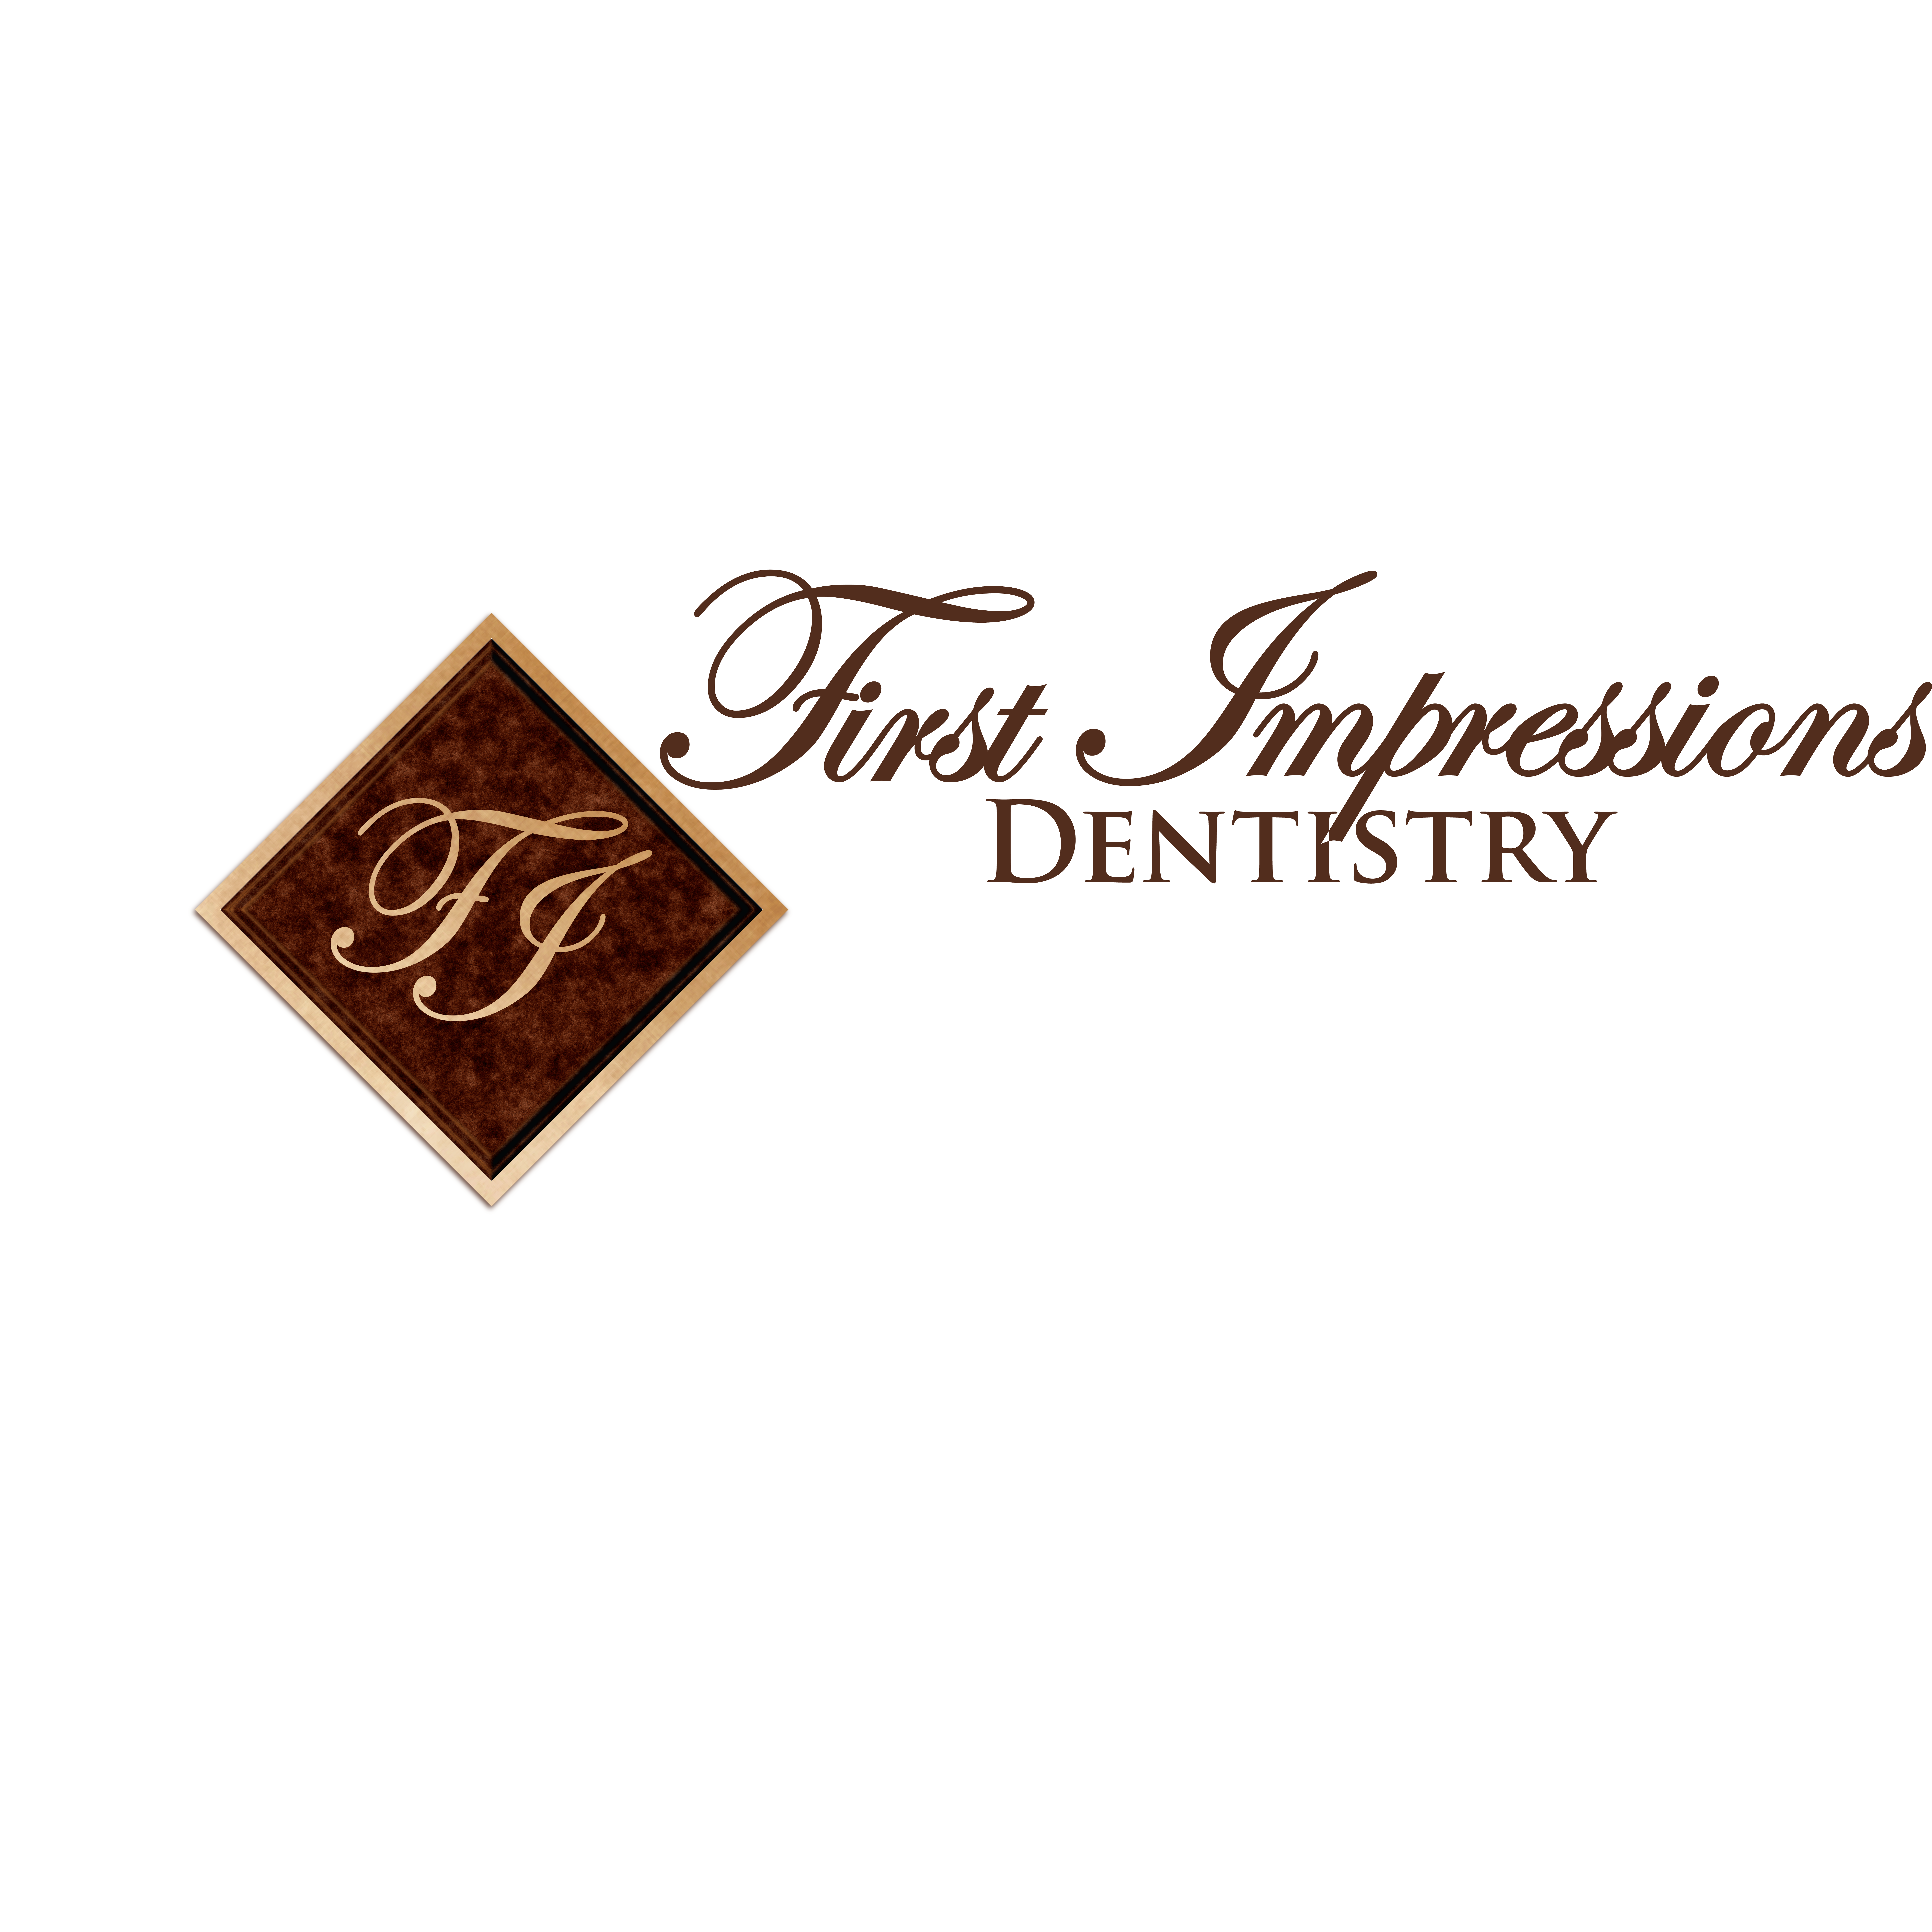 First Impressions Dentistry